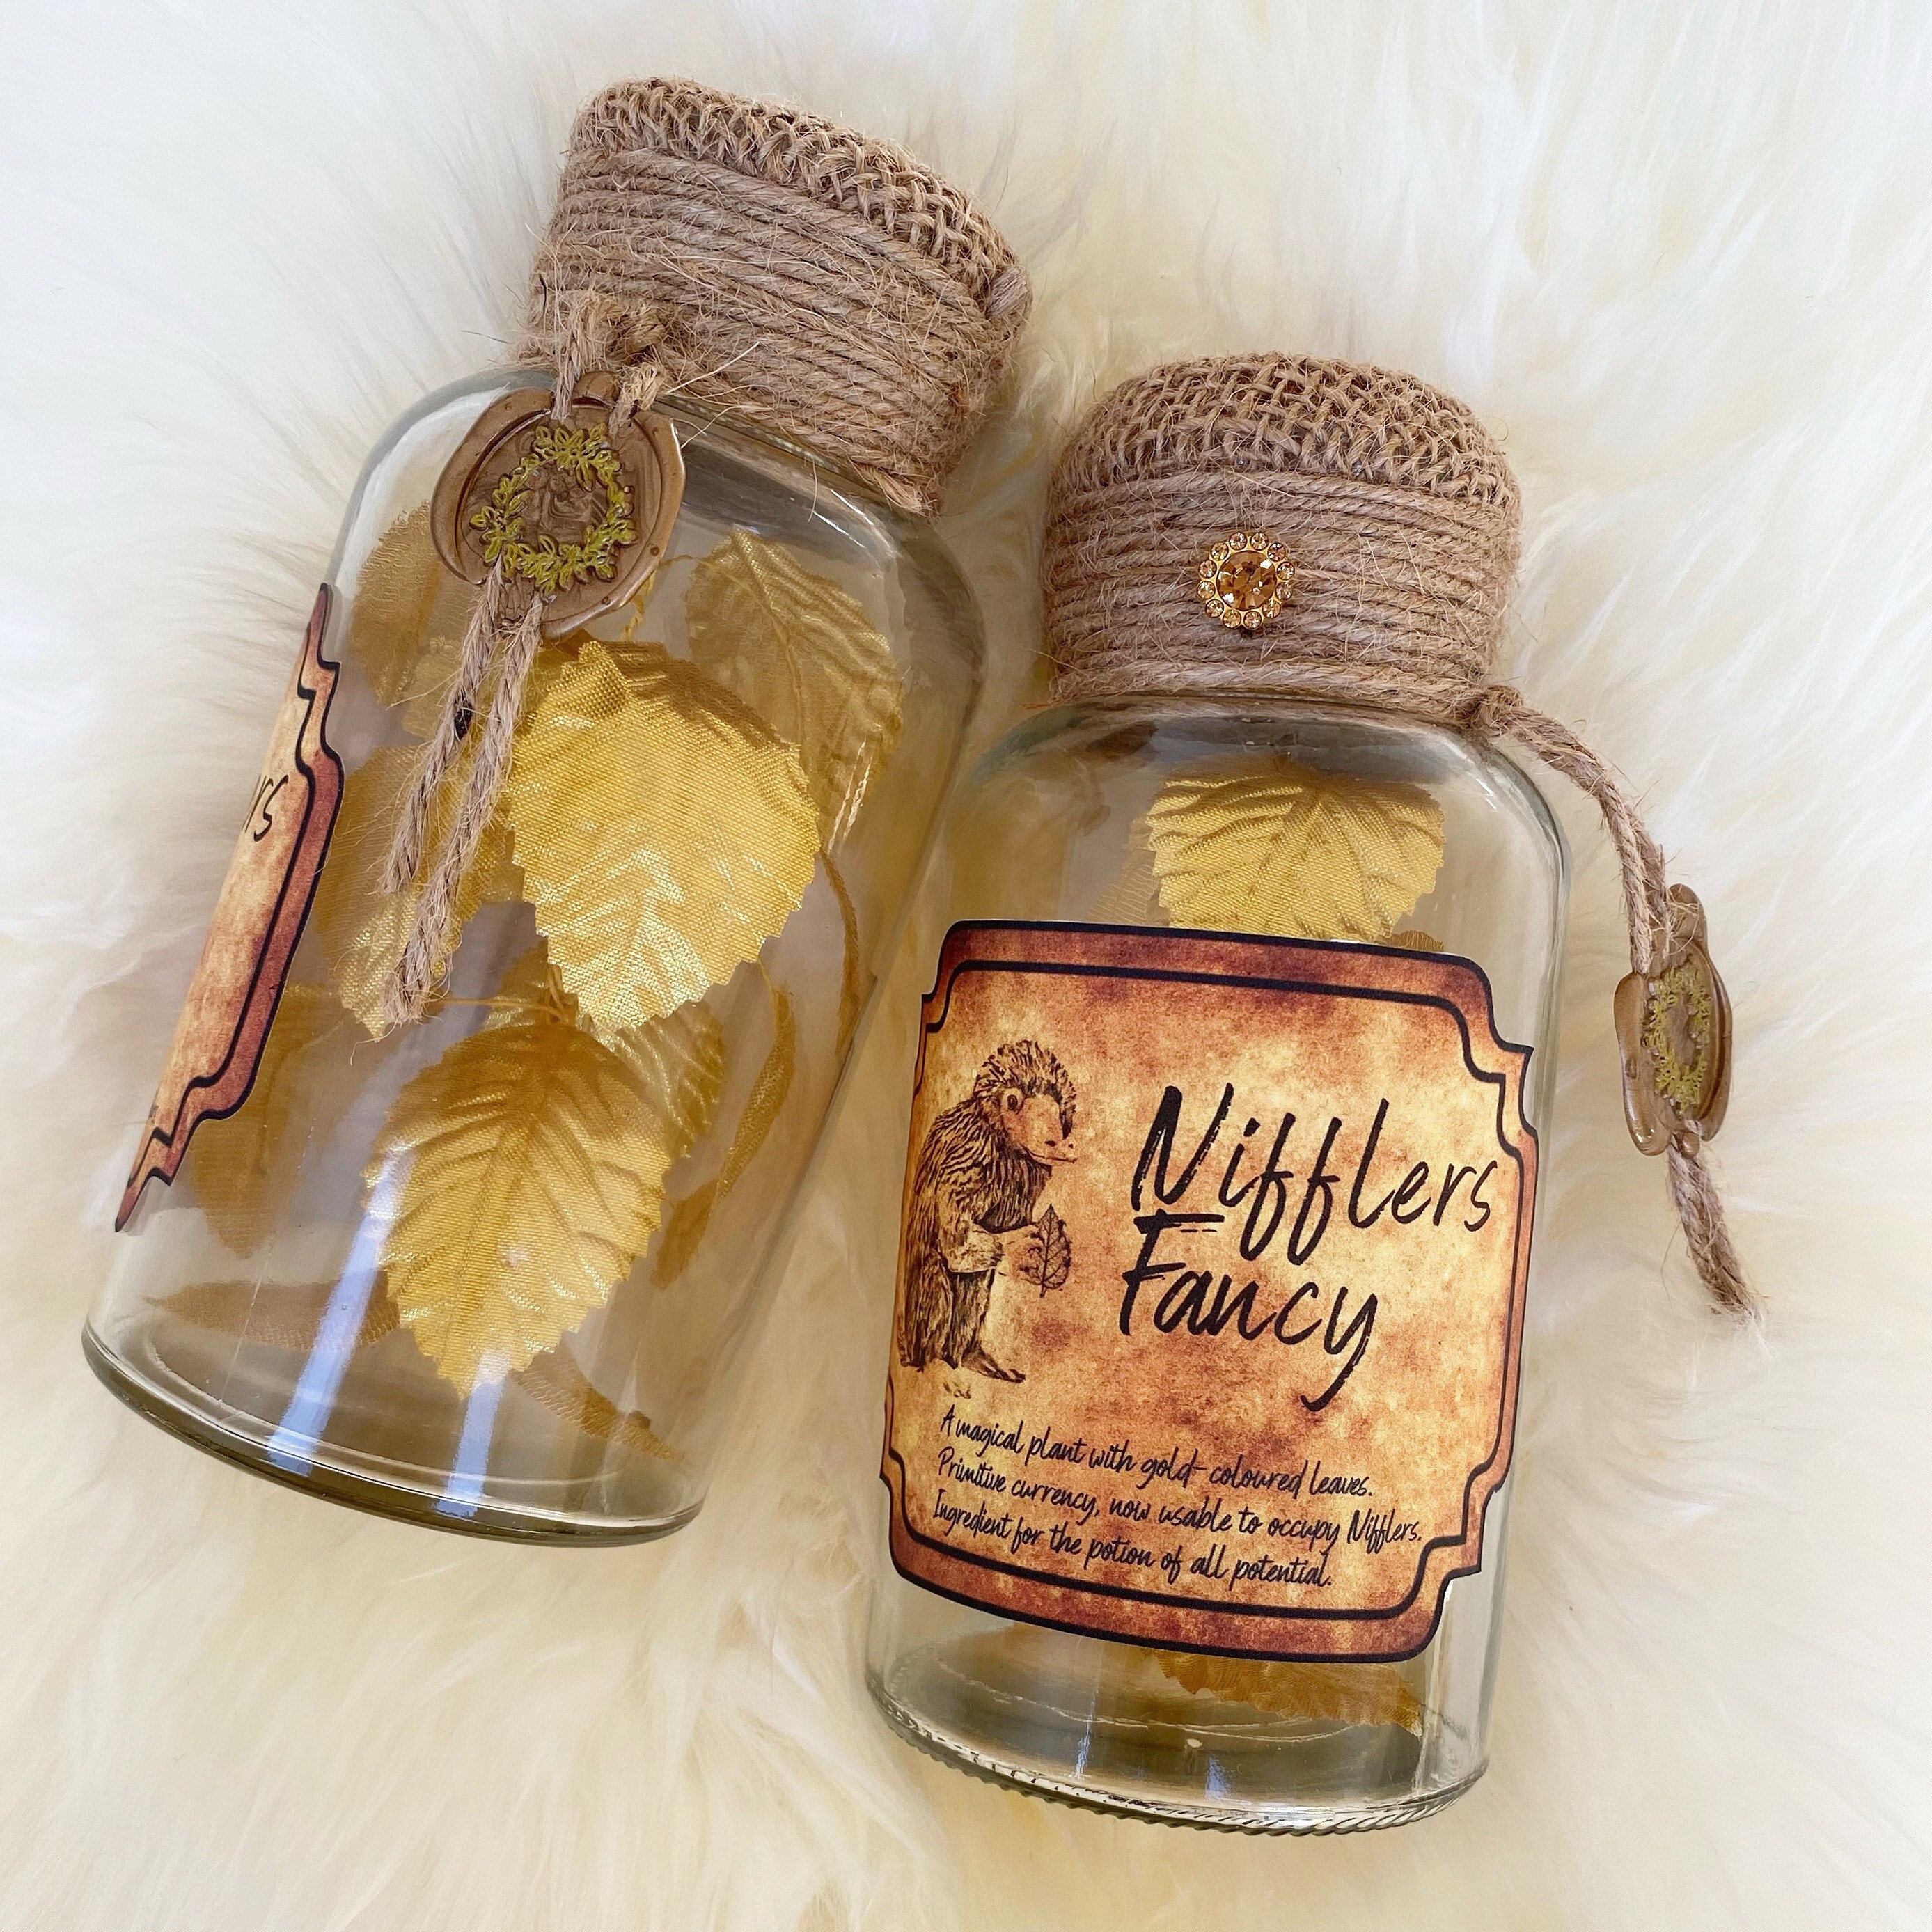 Nifflers Fancy harry potter inspired potion ingredient | Etsy